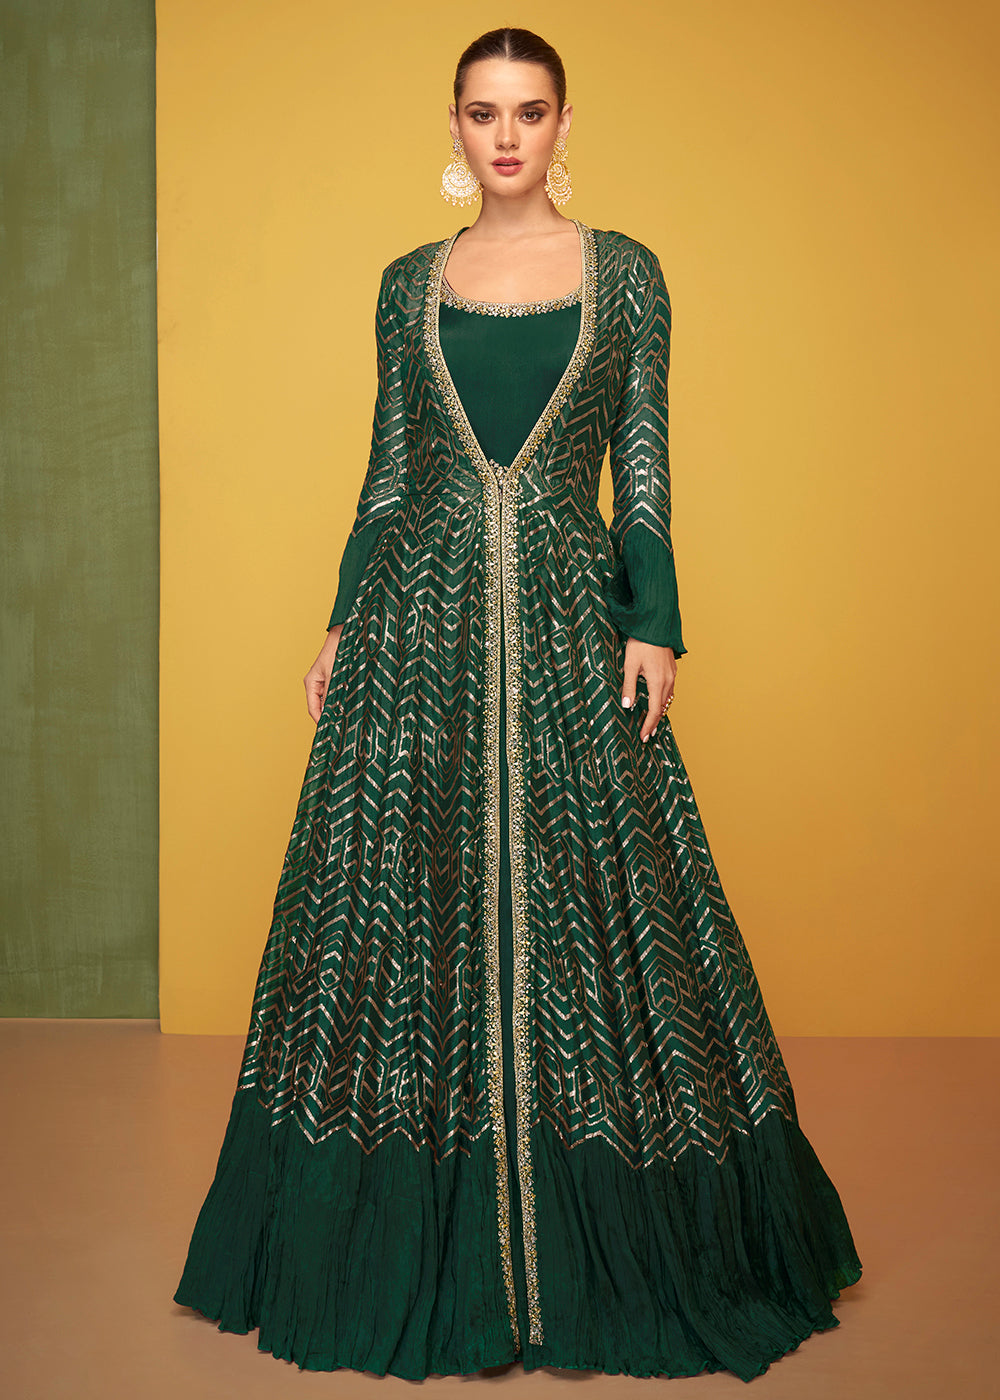 Buy Now Tempting Green Chinon Fabric Jacket Style Designer Anarkali Gown Online in USA, UK, Australia, New Zealand, Canada & Worldwide at Empress Clothing.